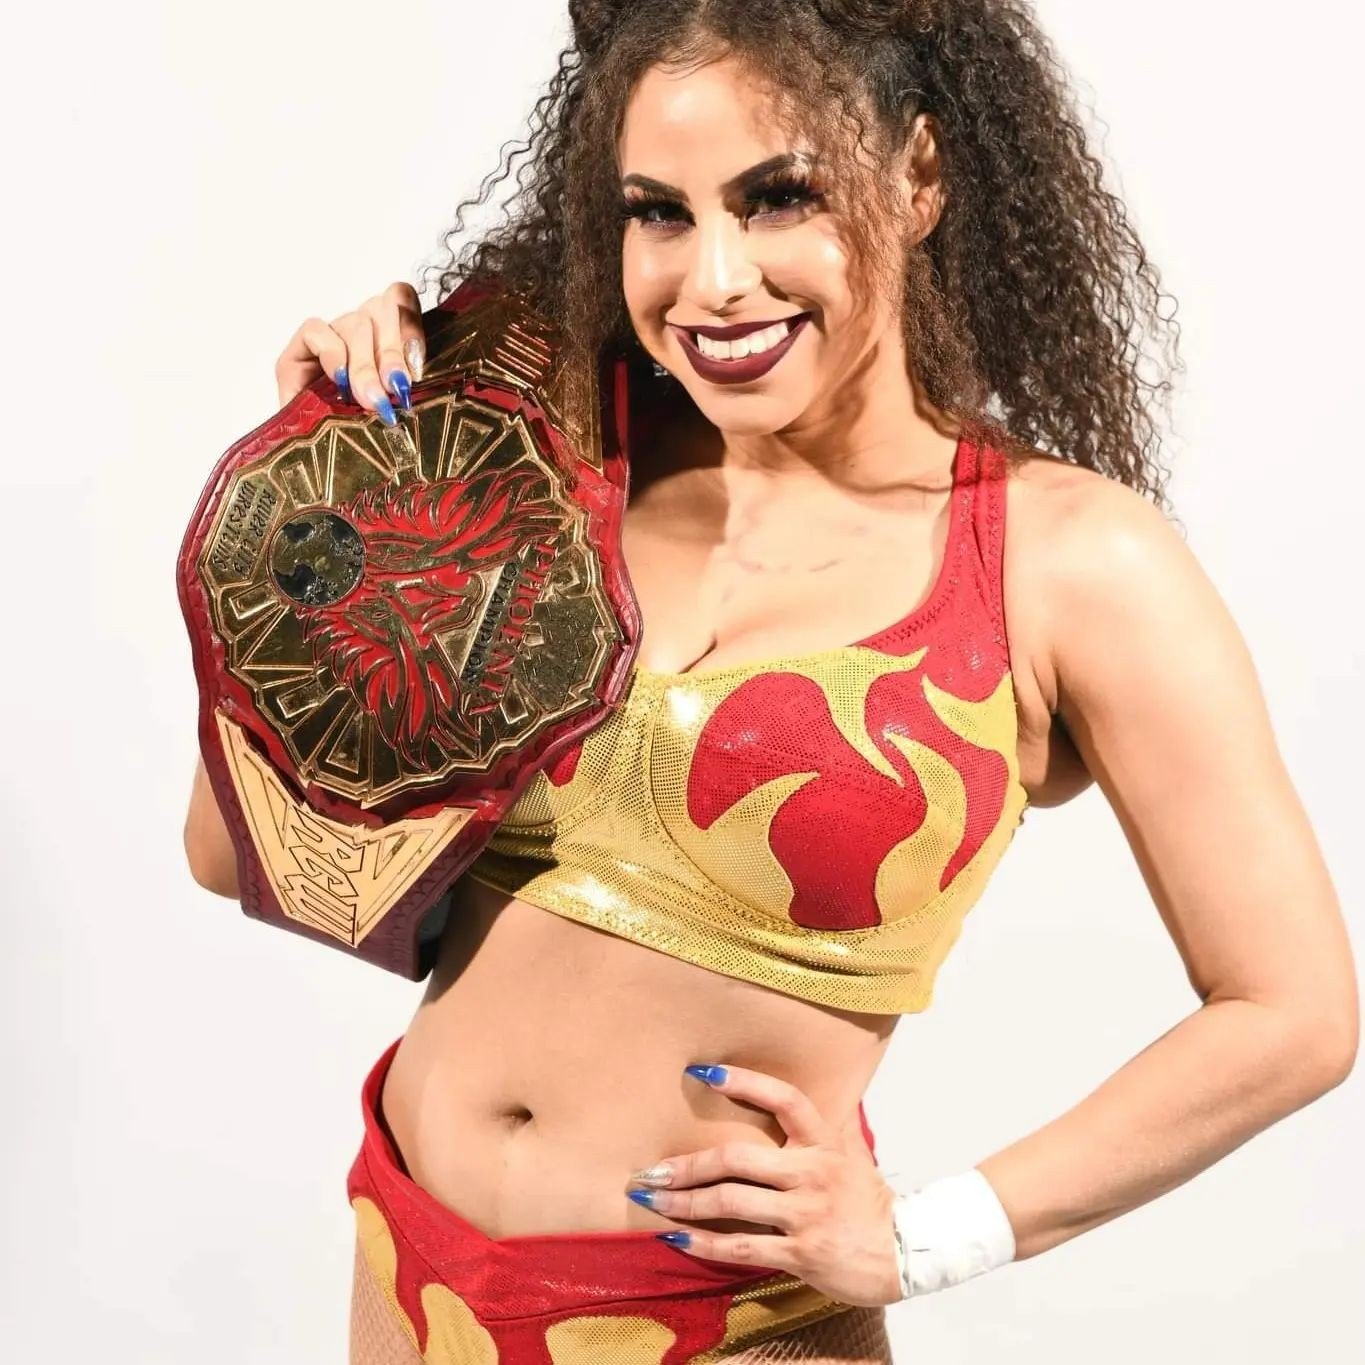 Photo by Ruinedcarpet with the username @Ruinedcarpet,  March 15, 2024 at 4:34 PM. The post is about the topic Women of wrestling and the text says 'Alejandra Lion.

#AlejandraLion #Latina #ProWrestler #Brunette #Beauty #Clothed #WrestlingGear #Smile #WomensWrestling #ProWrestling'